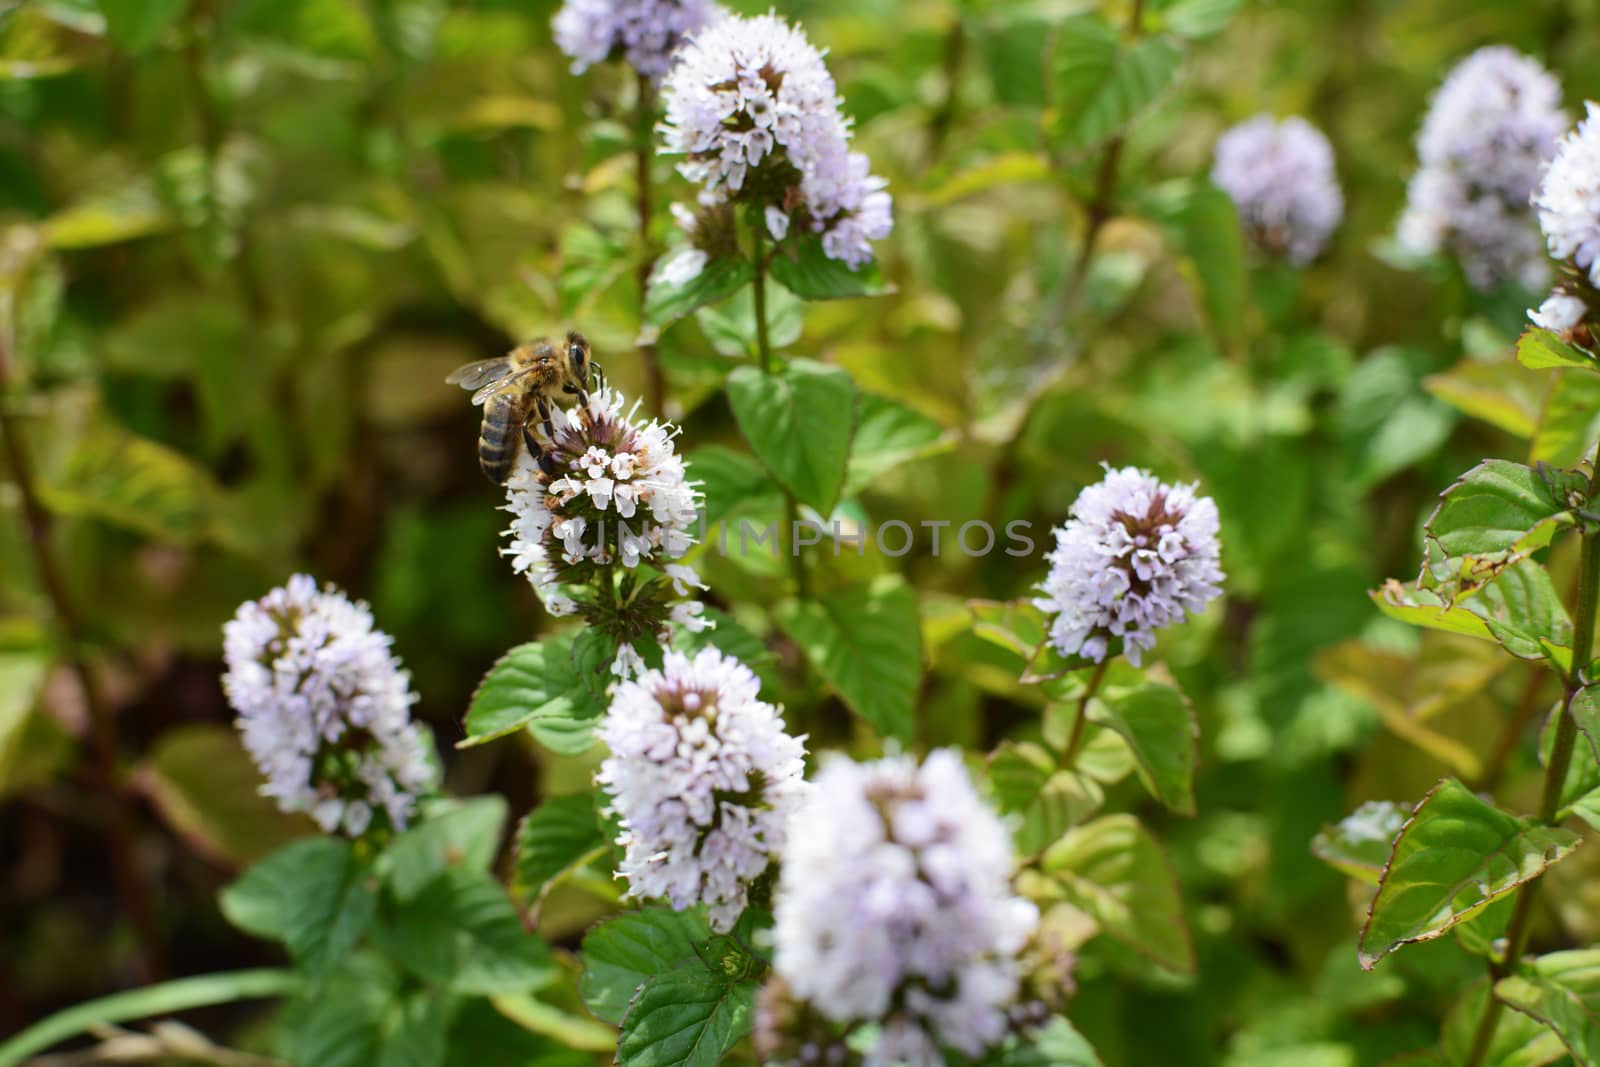 Honeybee taking nectar from white mint flowers by sarahdoow